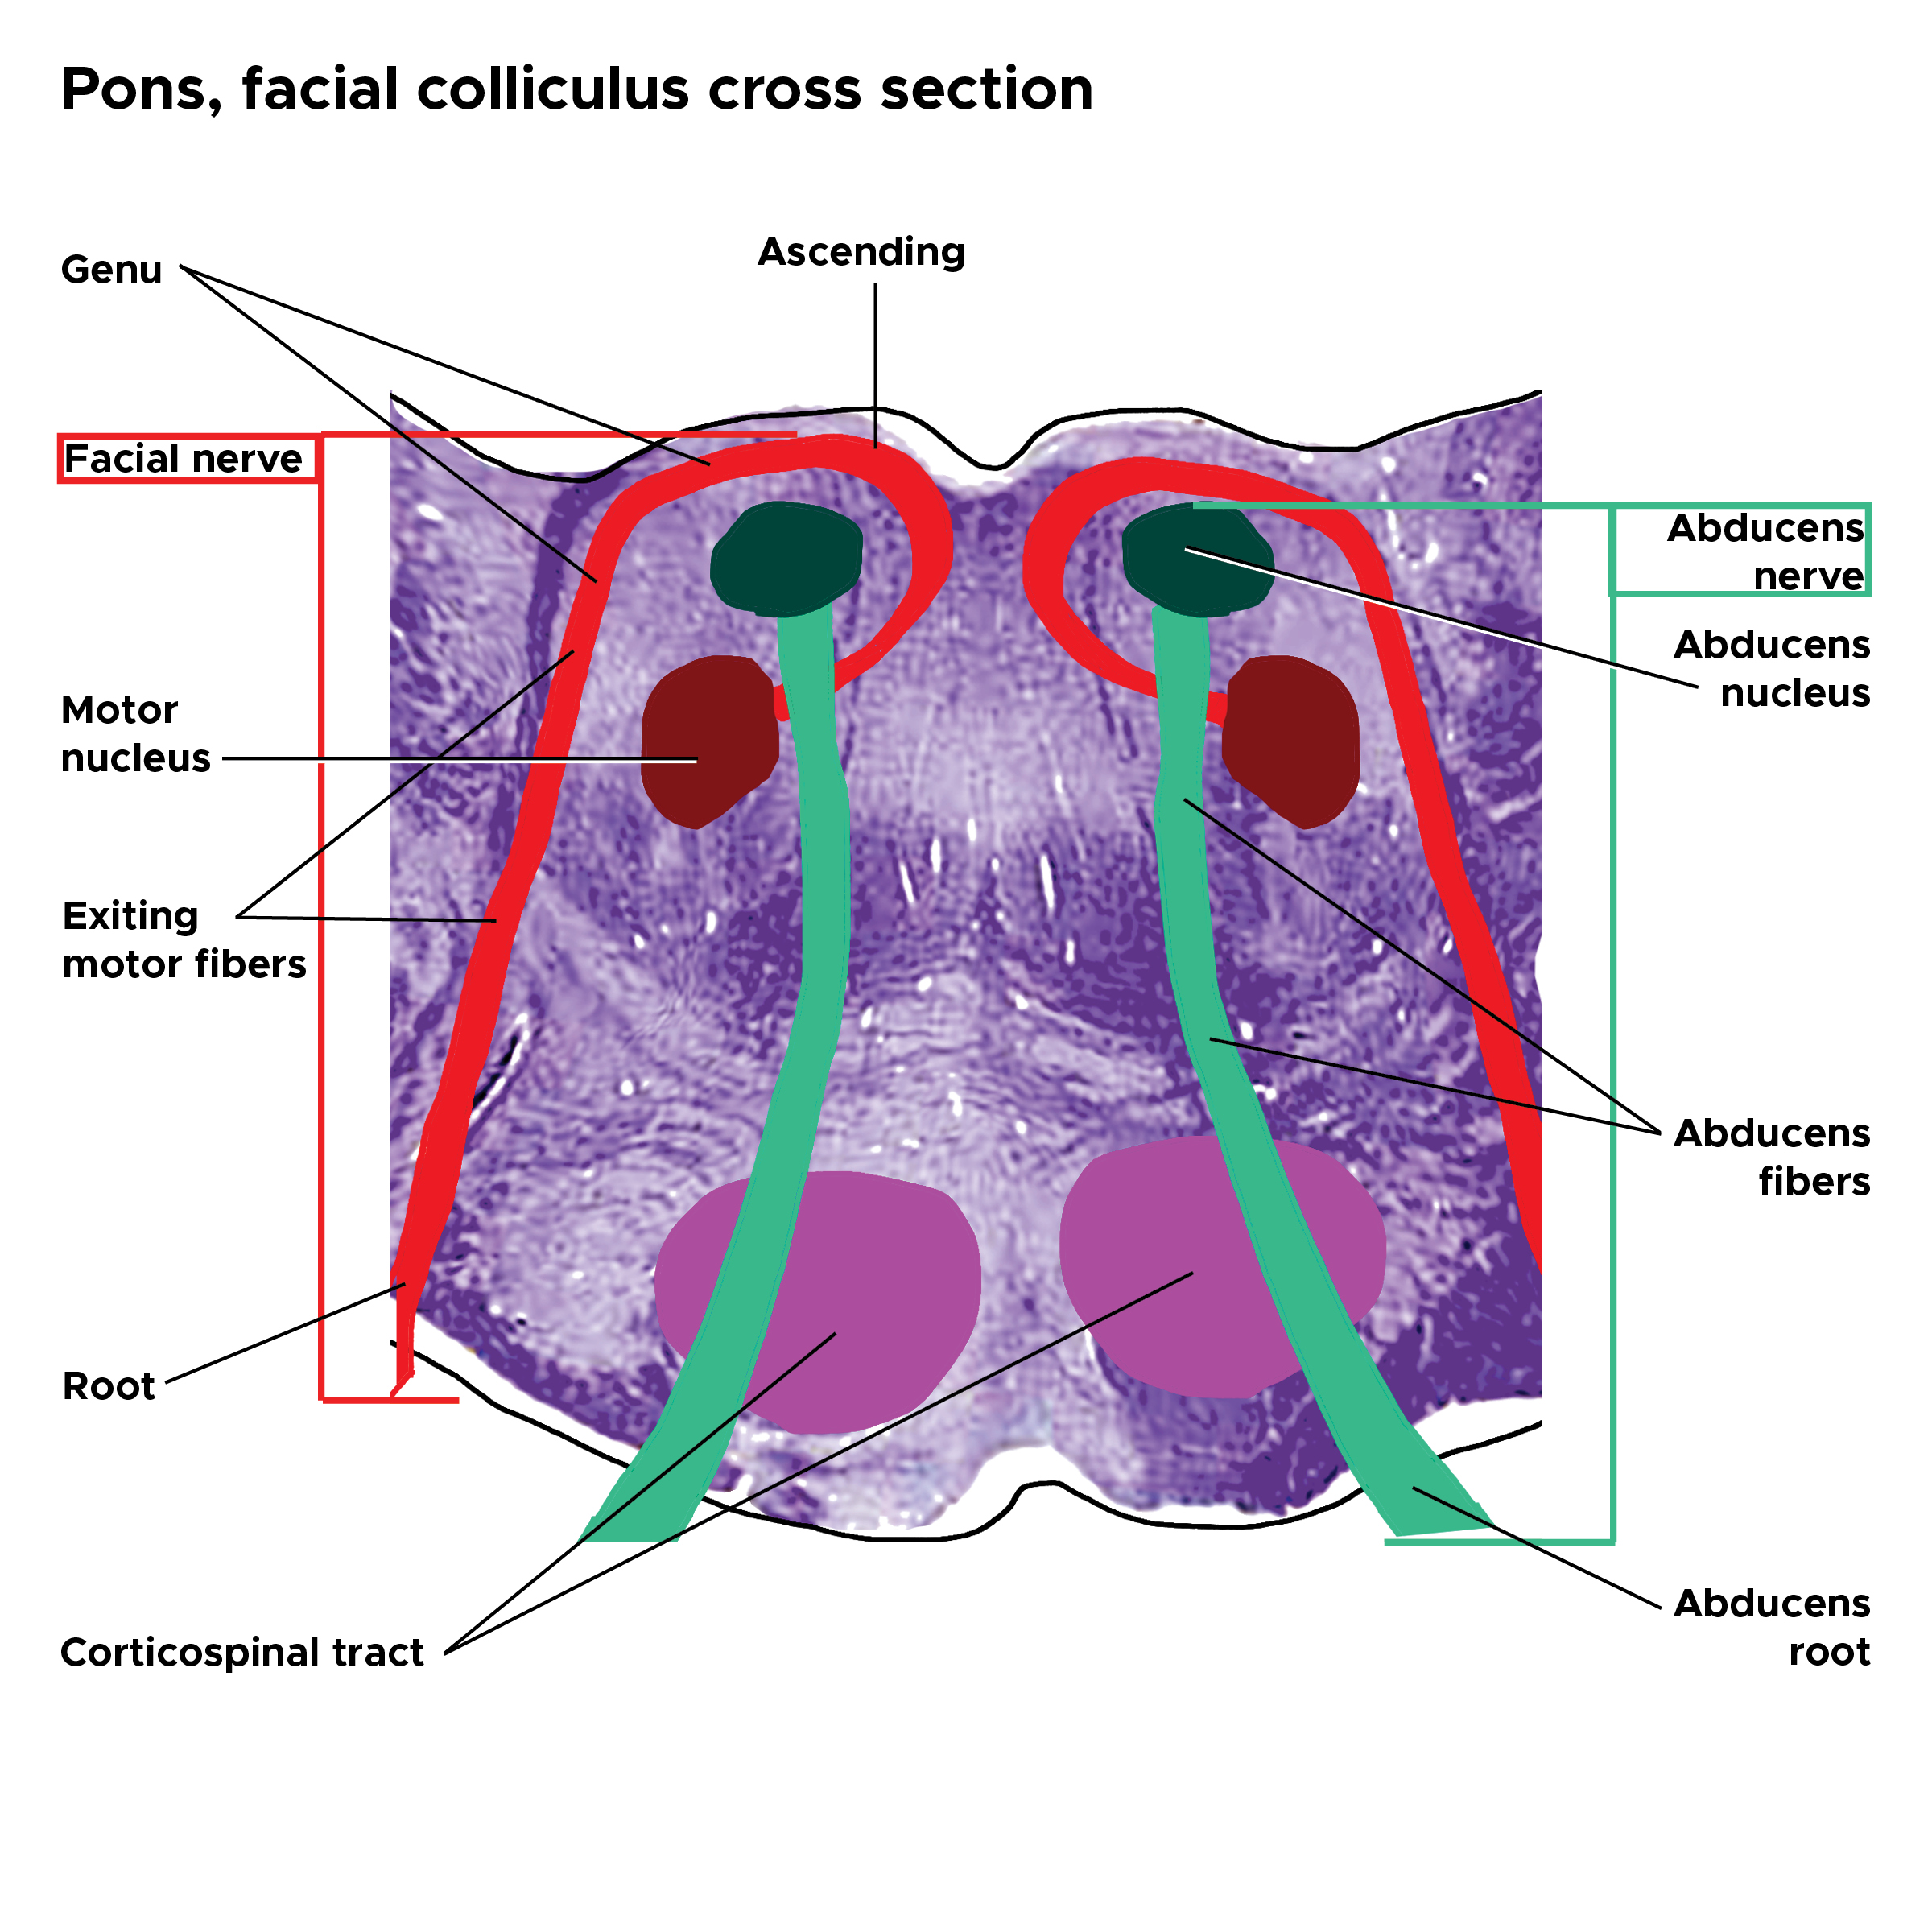 Illustration of cross section of the pons at the facial colliculus. Facial nerve, fibers and nucleus; abducens nerve, fibers and nucleus.